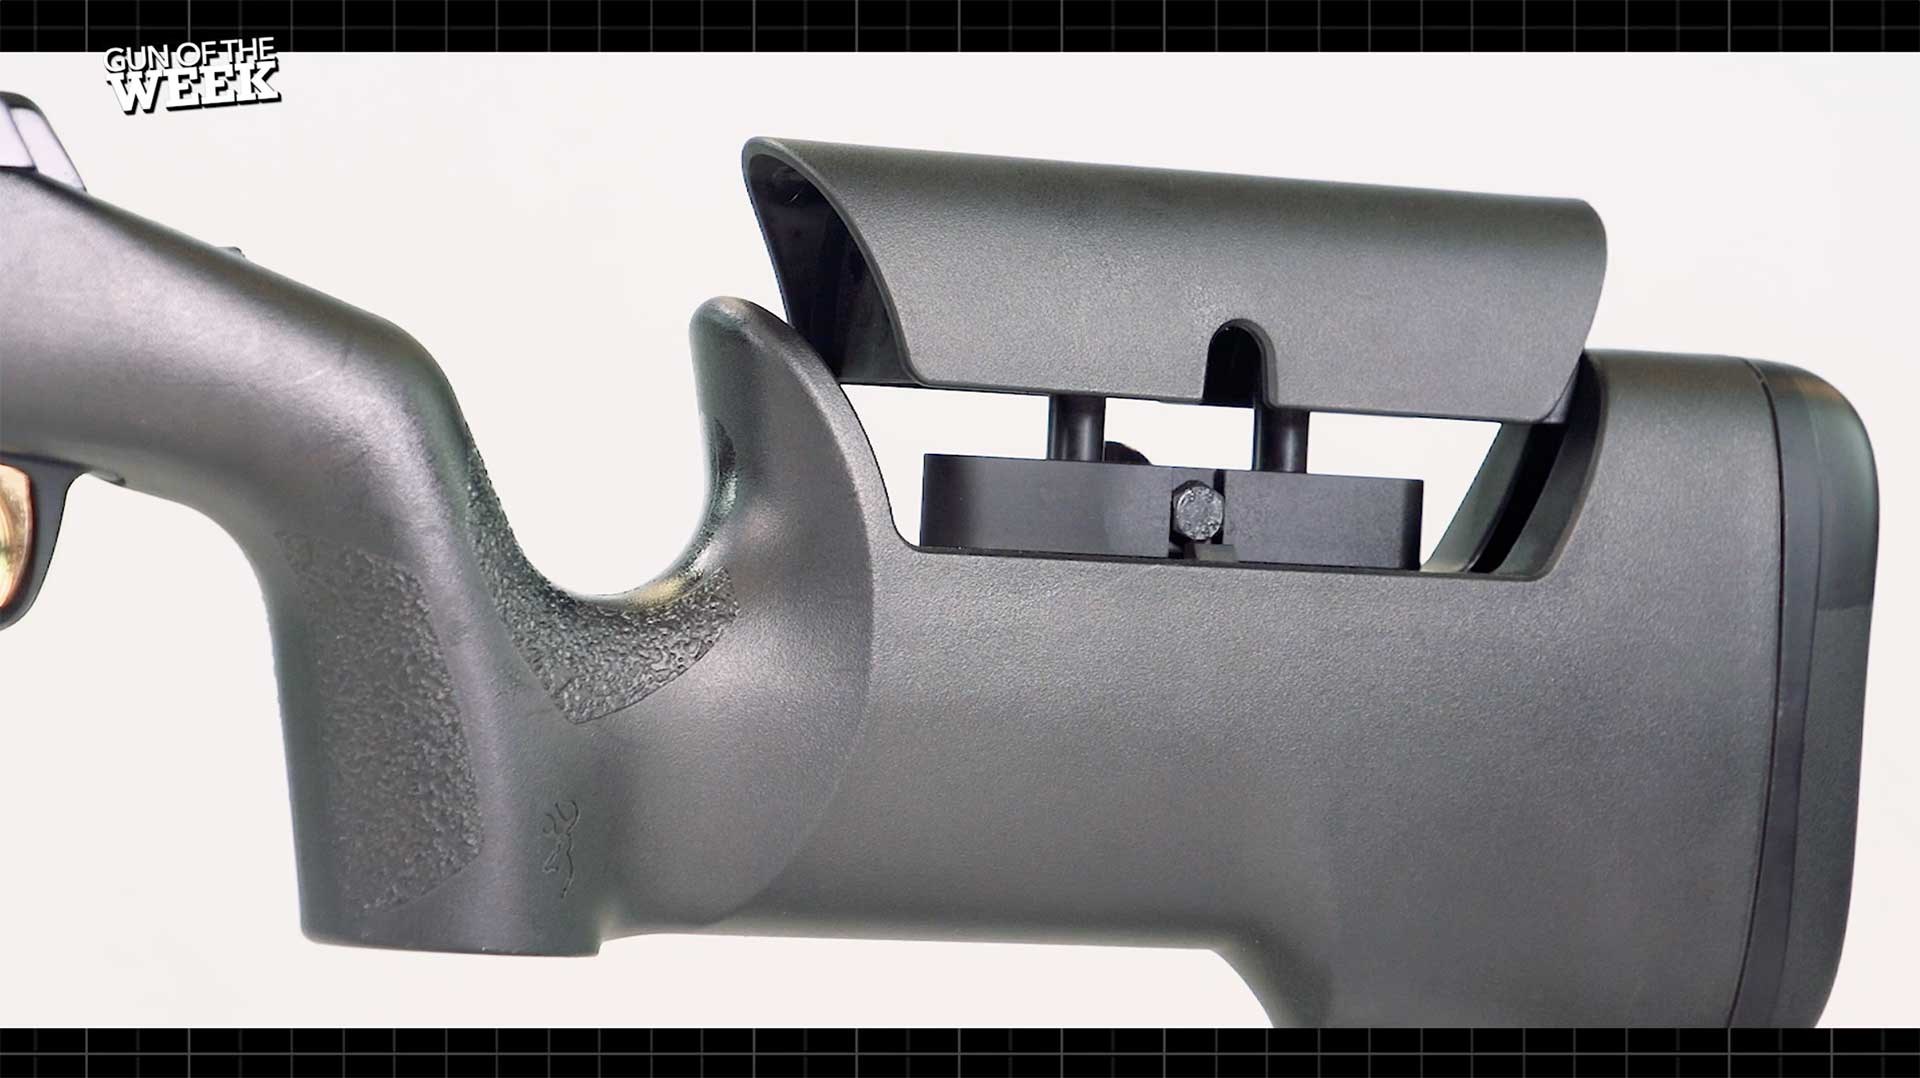 Adjustable stock of the Browning X-Bolt Target Max rifle.